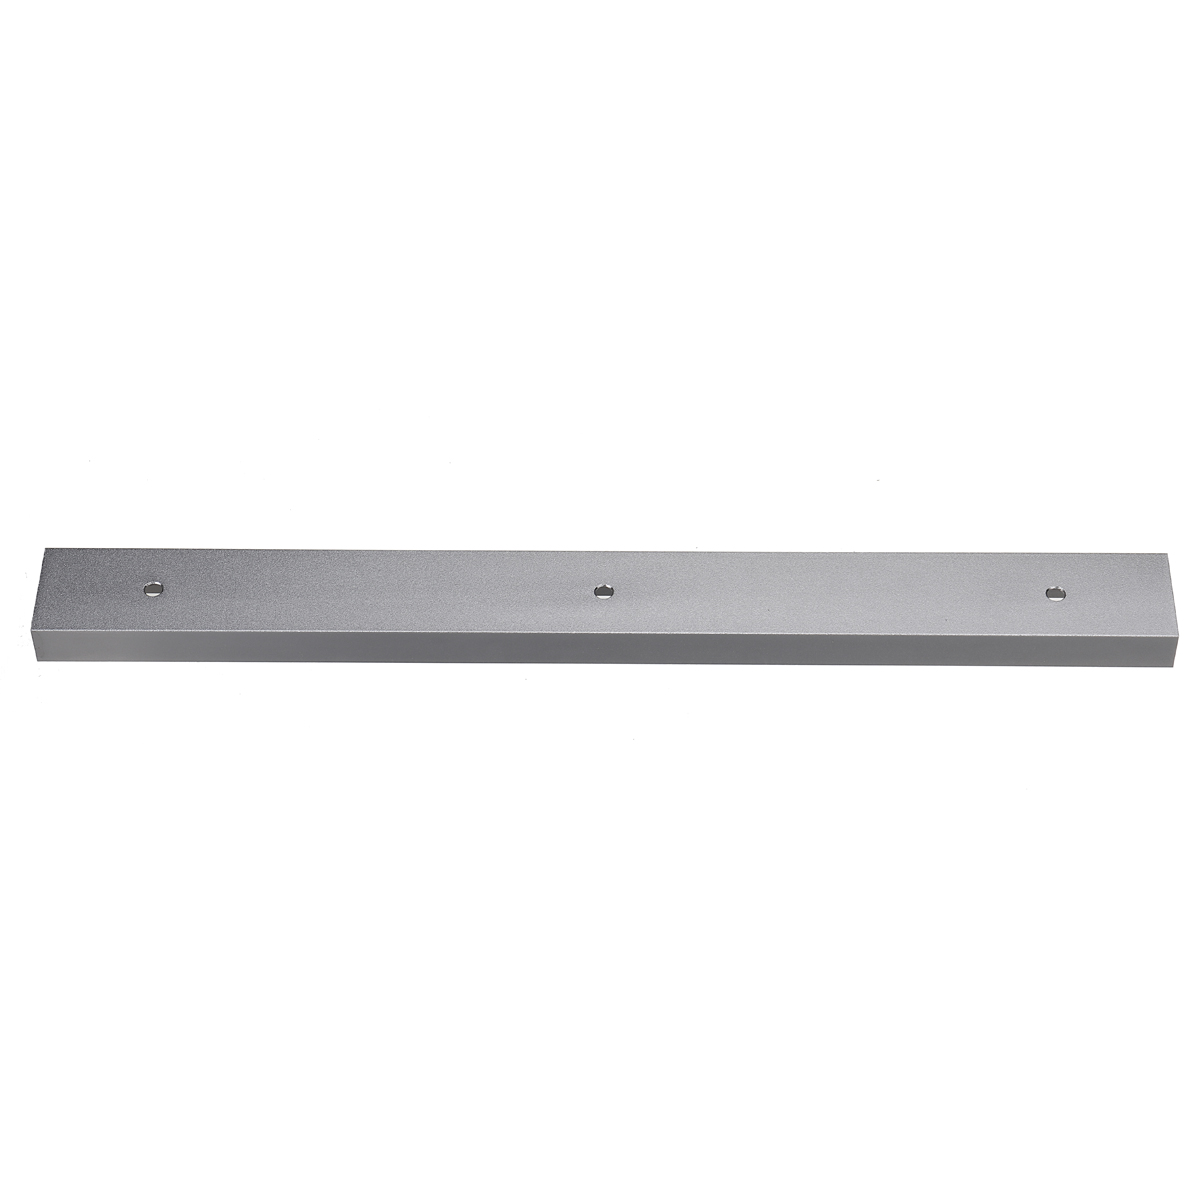 300mm-to-1220mm-Grey-T-Track-with-Predrilled-Mounting-Holes-30mm-x-128mm-Miter-Slot-for-Saw-Router-T-1810952-6